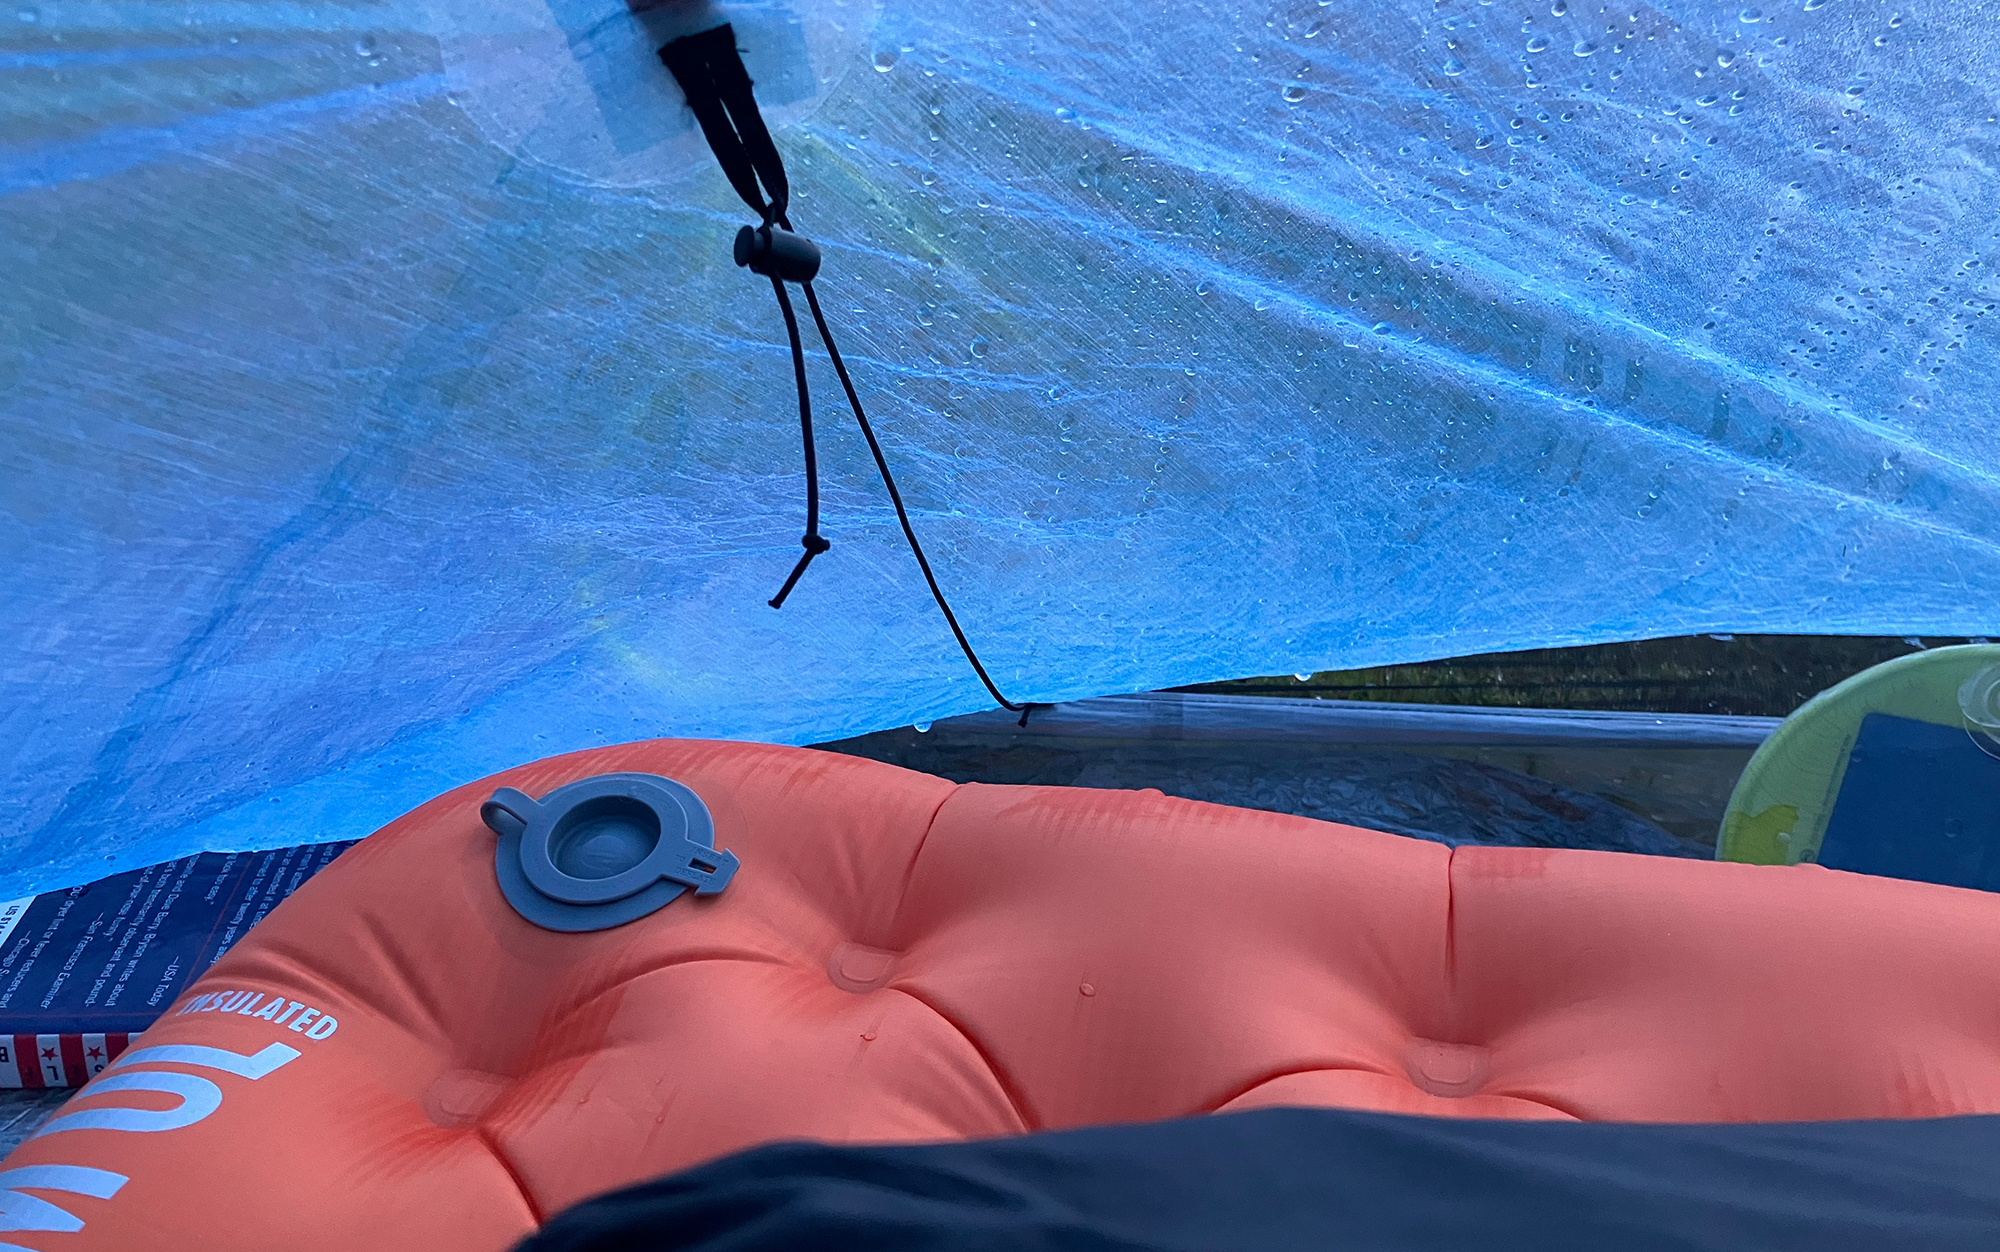 One of the biggest issues with incorrectly pitching the Zpacks Solo Plex is that it cuts down on your usable floor space. In the extreme condensation of the Oregon Coast, that meant our testerâs head and sleeping bag were both wet when she woke up in the morning.